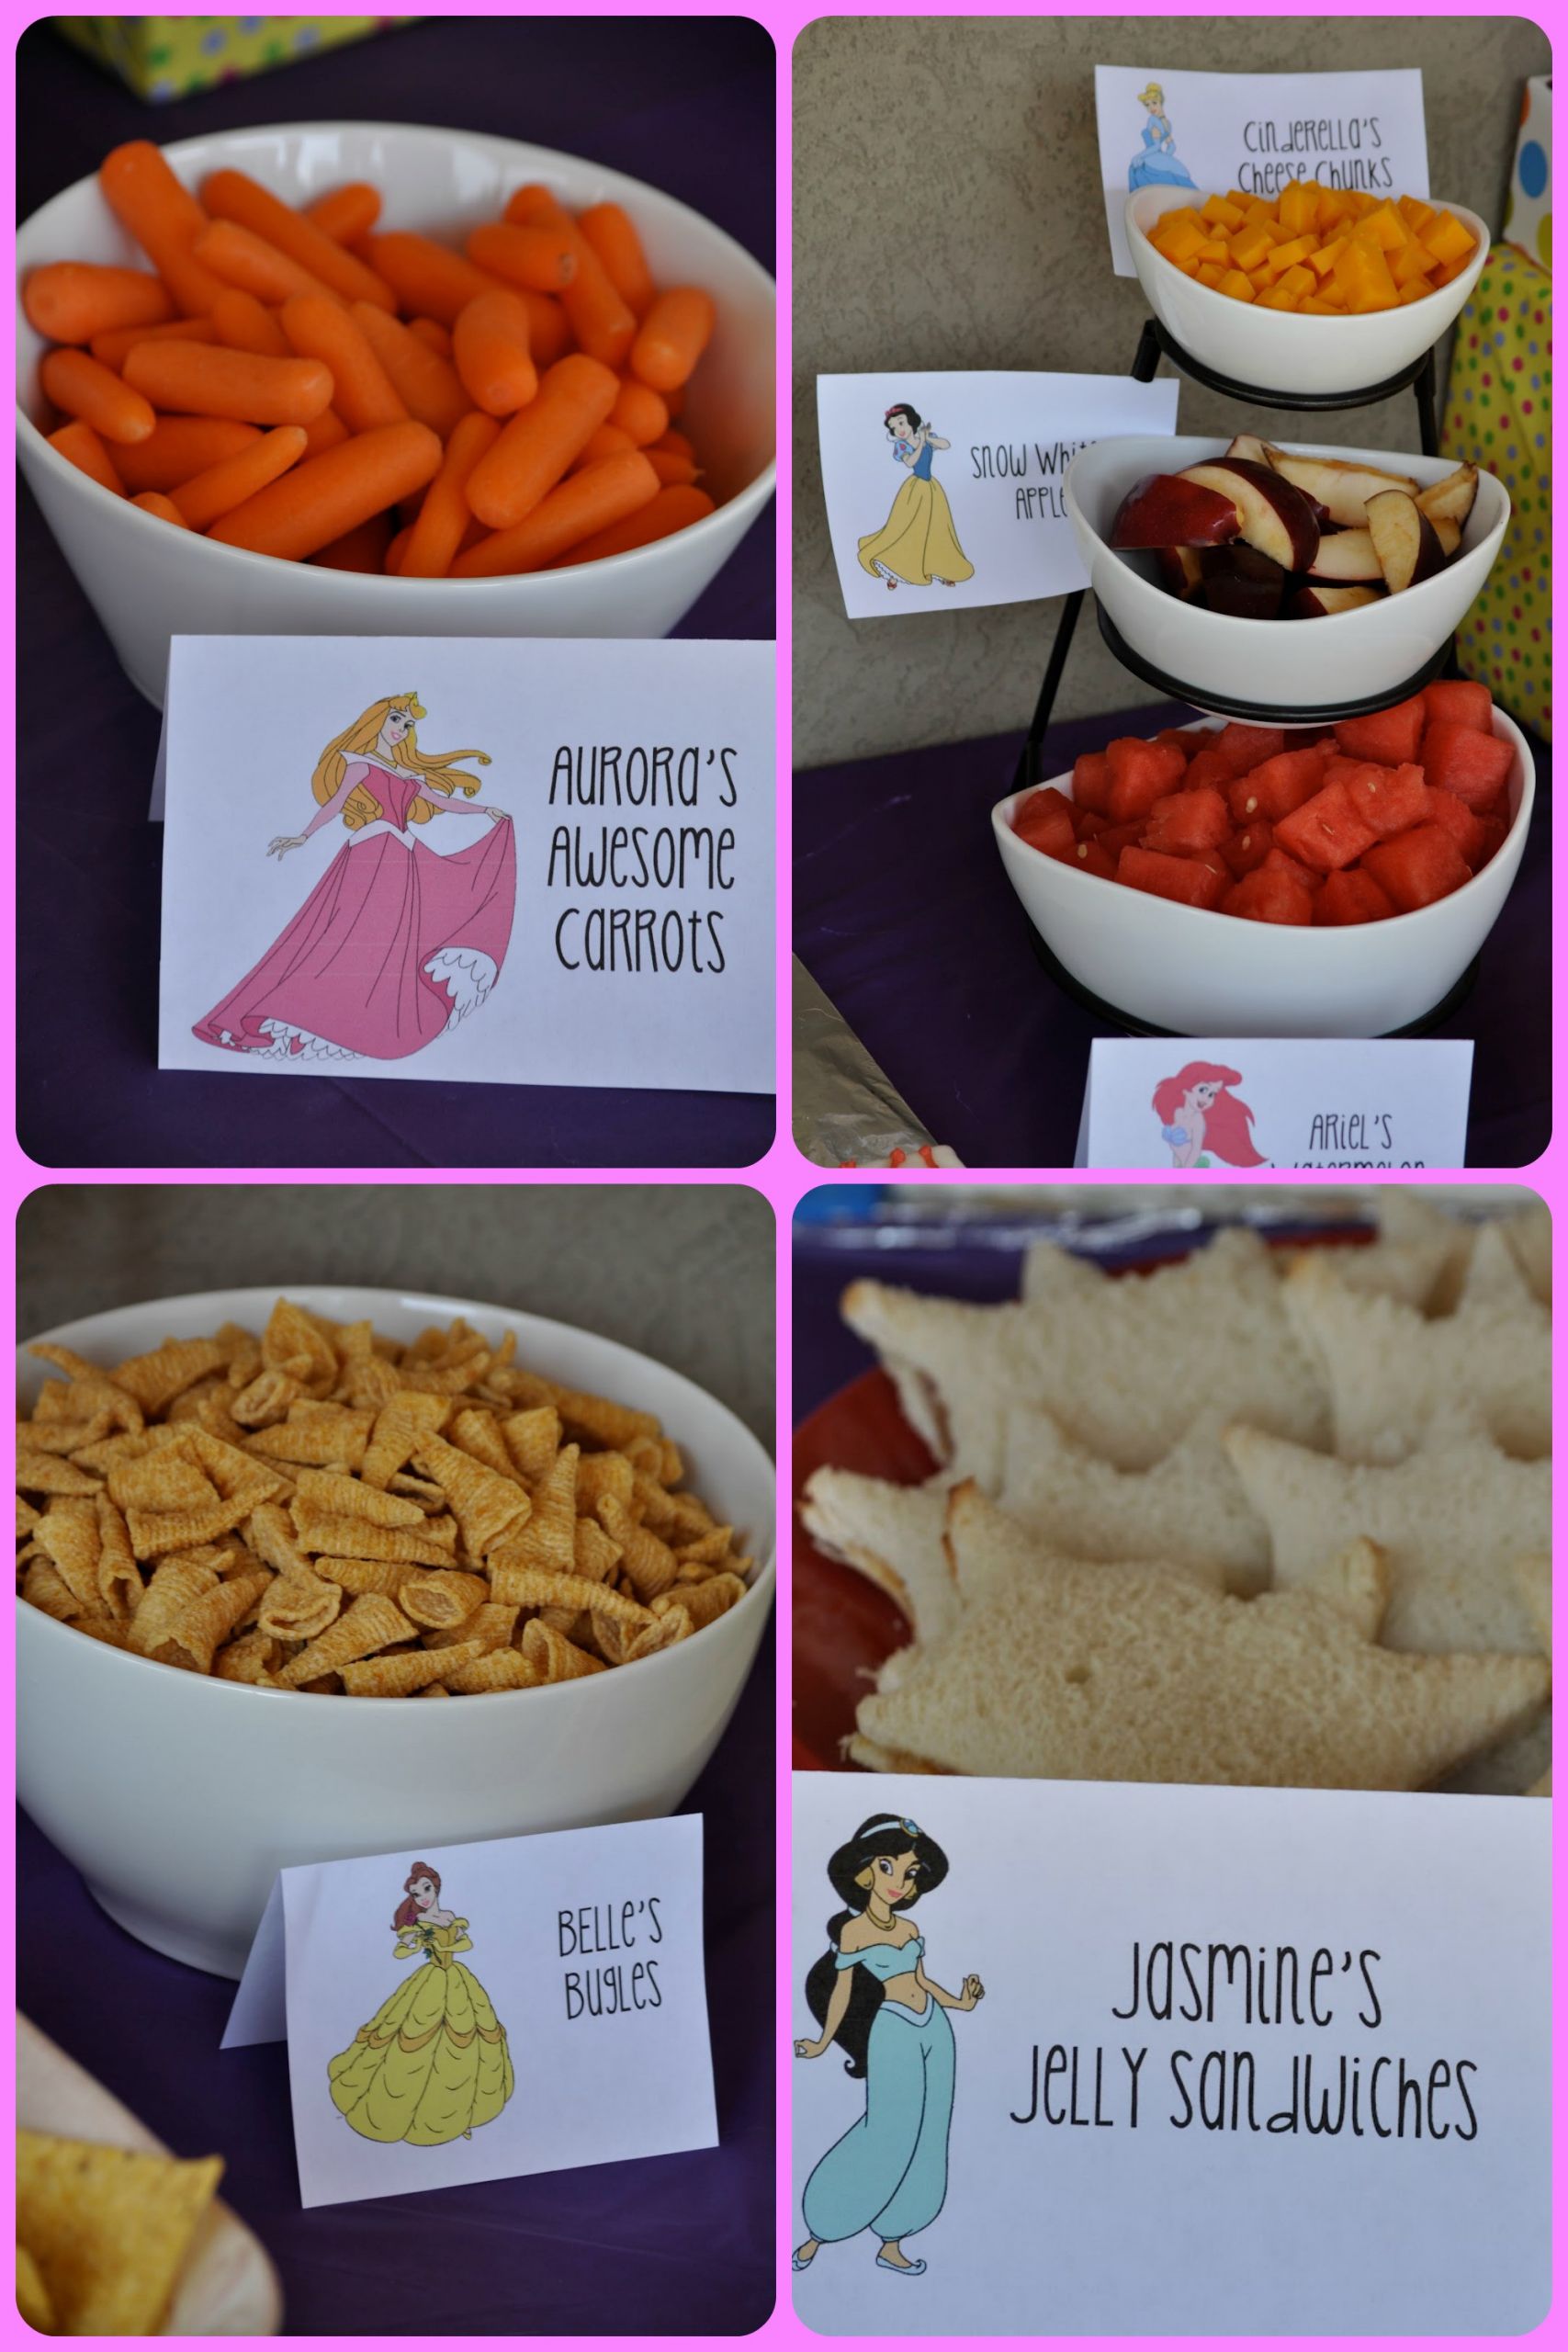 Disney Party Food Ideas
 princess birthday party ideas Archives events to CELEBRATE